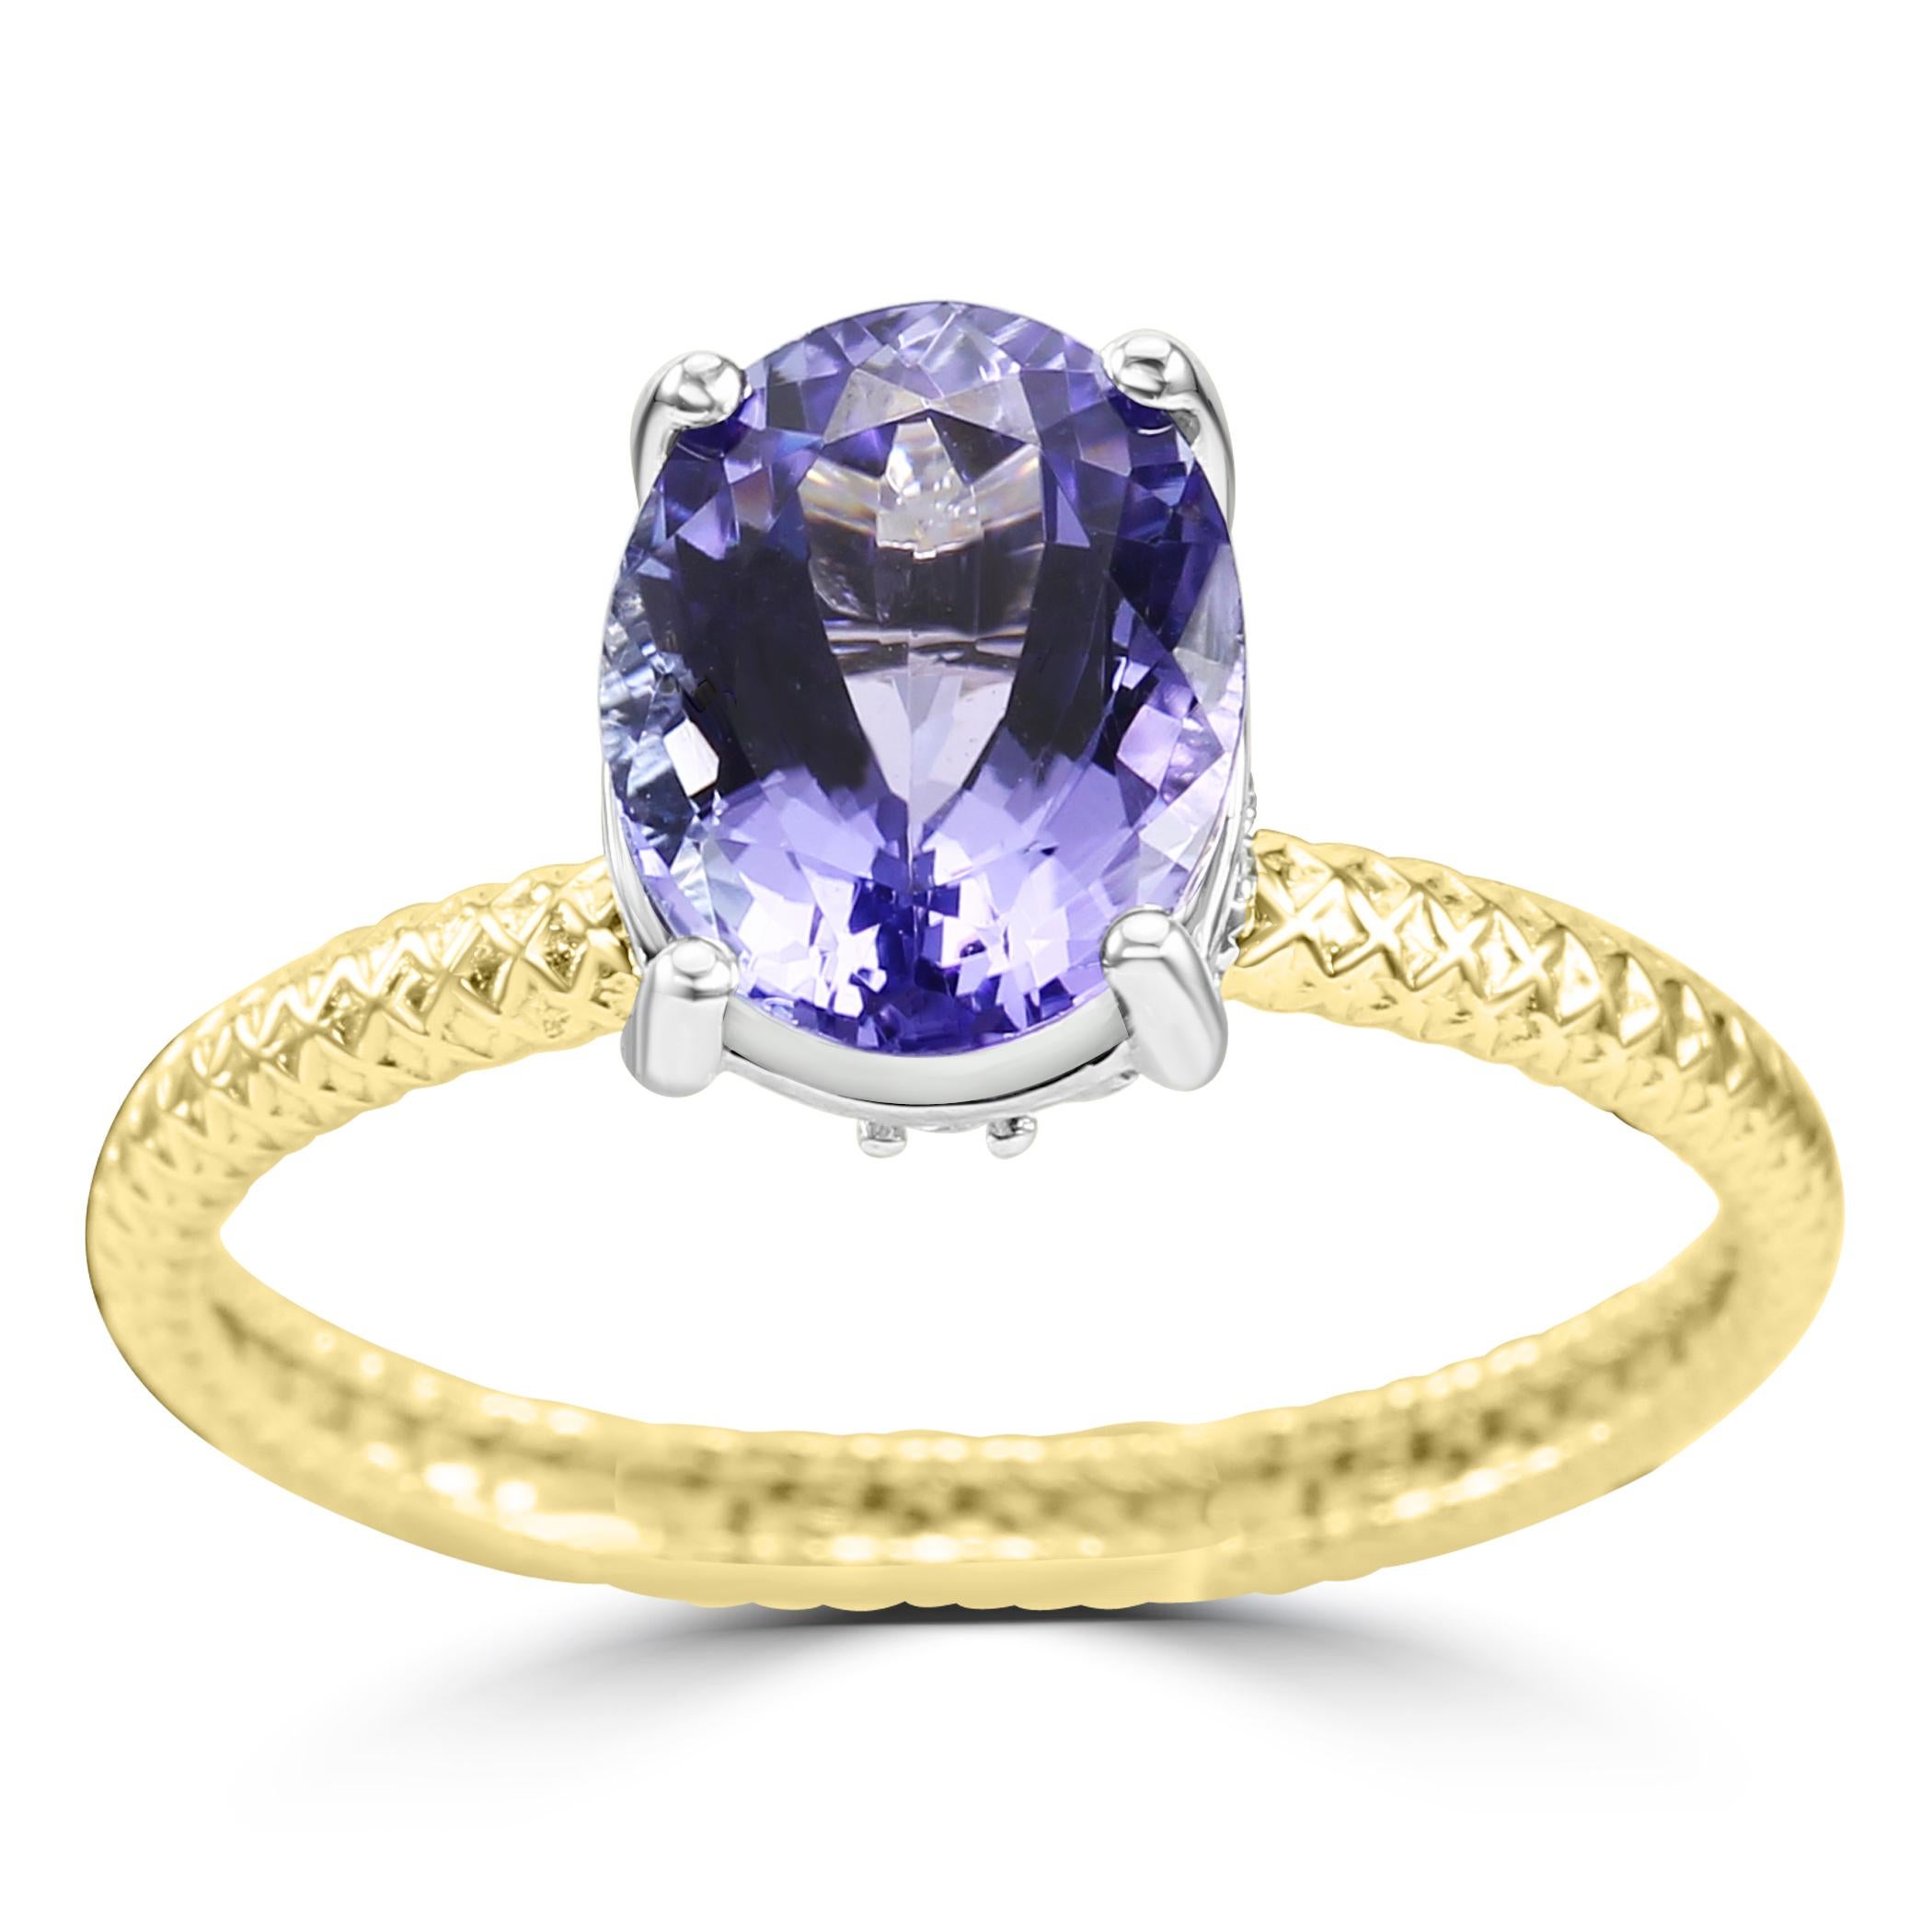 The heart and soul of this ring is the beautiful Tanzanite Oval, boasting a generous 2.33 carats, capturing the mesmerizing hues of violet-blue that are characteristic of this rare gemstone.

Adding a touch of elegance to the design, the ring